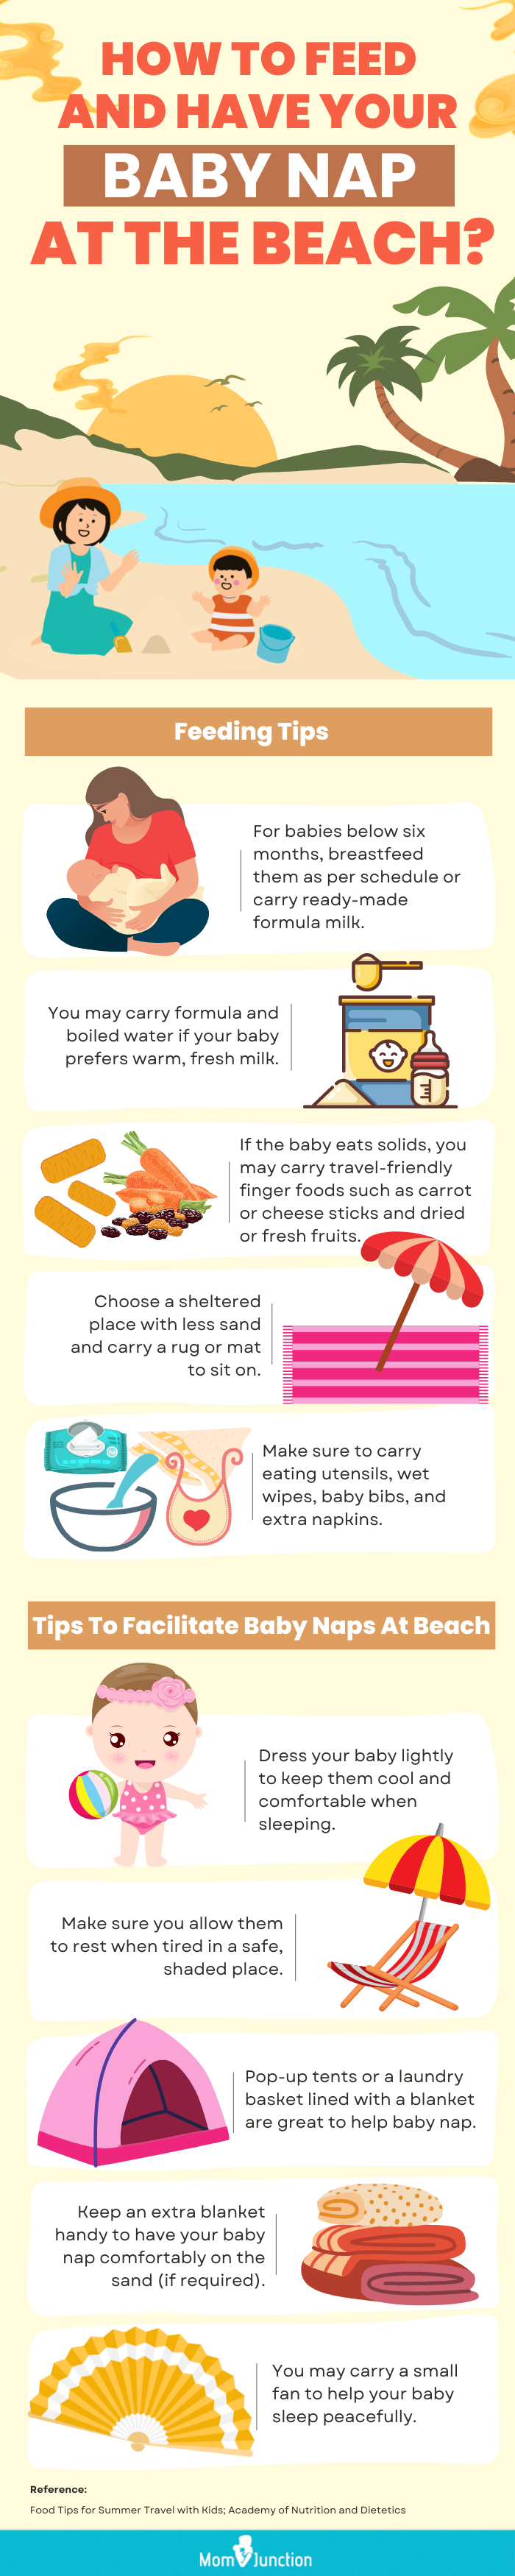 how to feed and have your baby Nap at the beach [infographic]